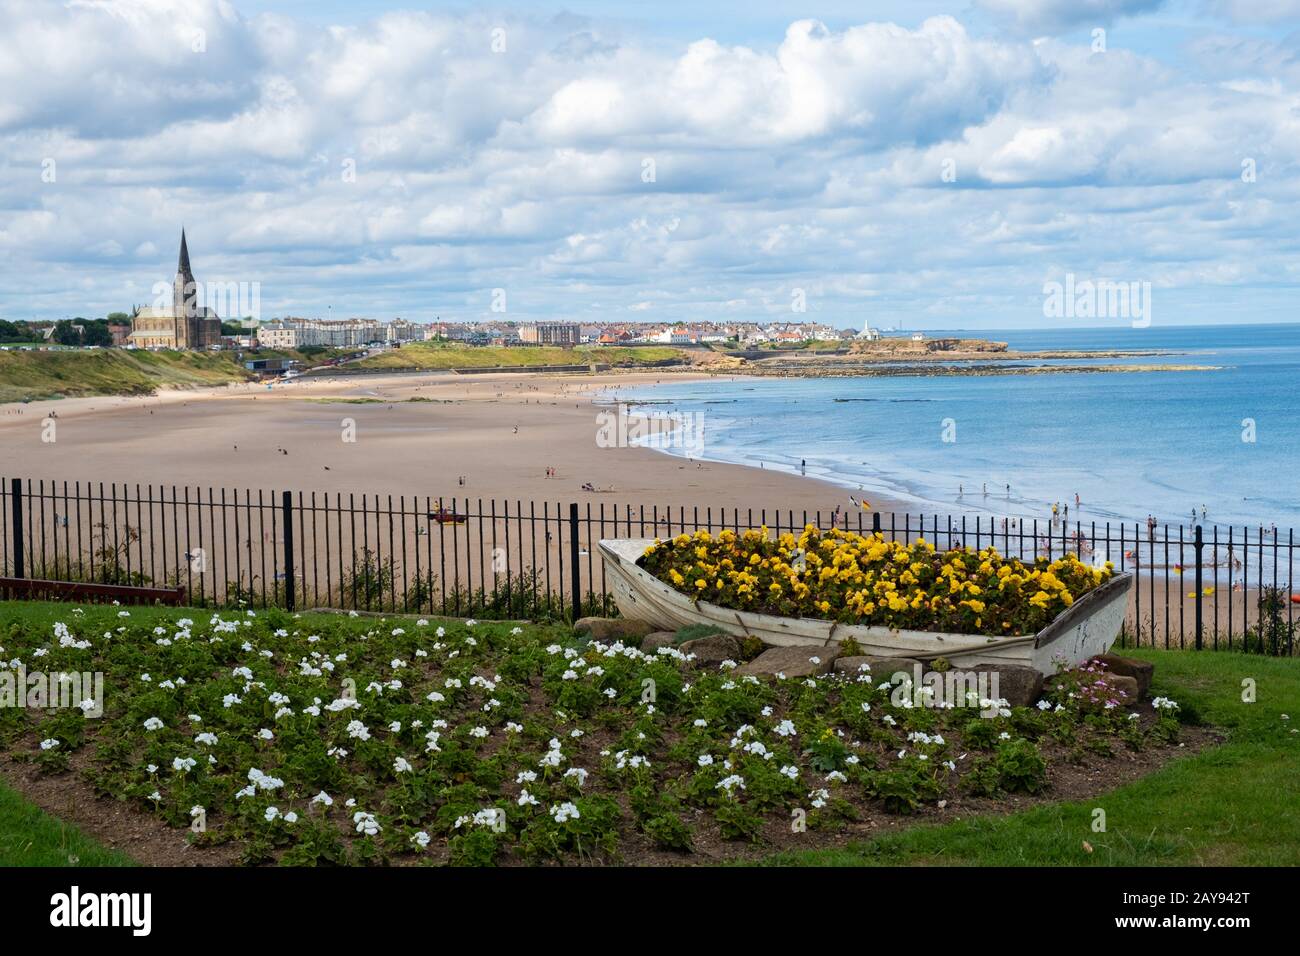 Ornamental Boat containing Flowers, with Tynemouth's Coastline in the background Stock Photo